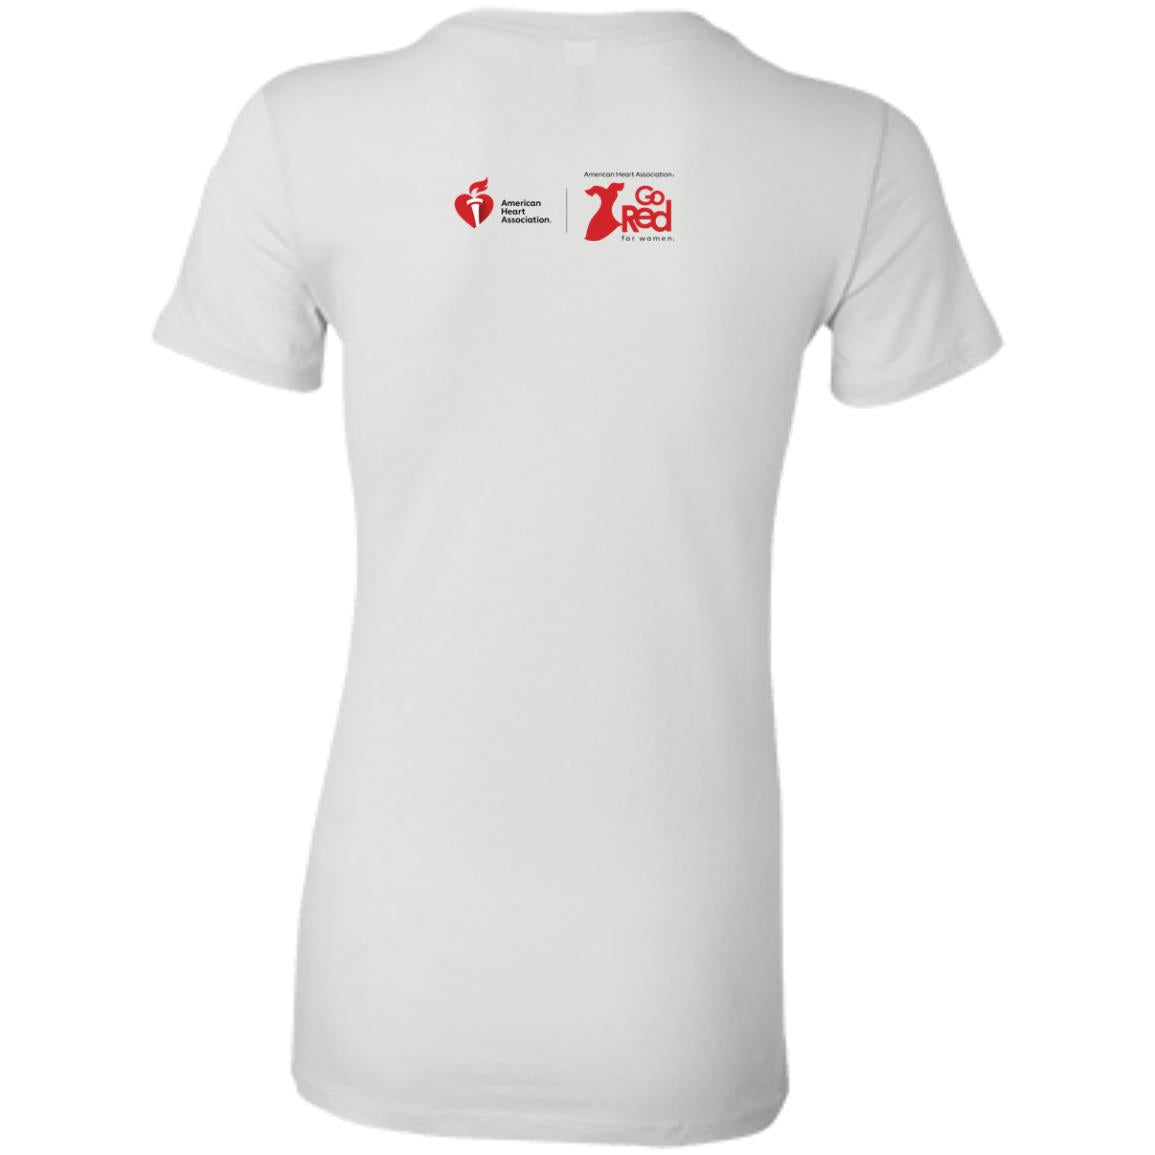 Go Red for Women Ladies' Favorite T-Shirt